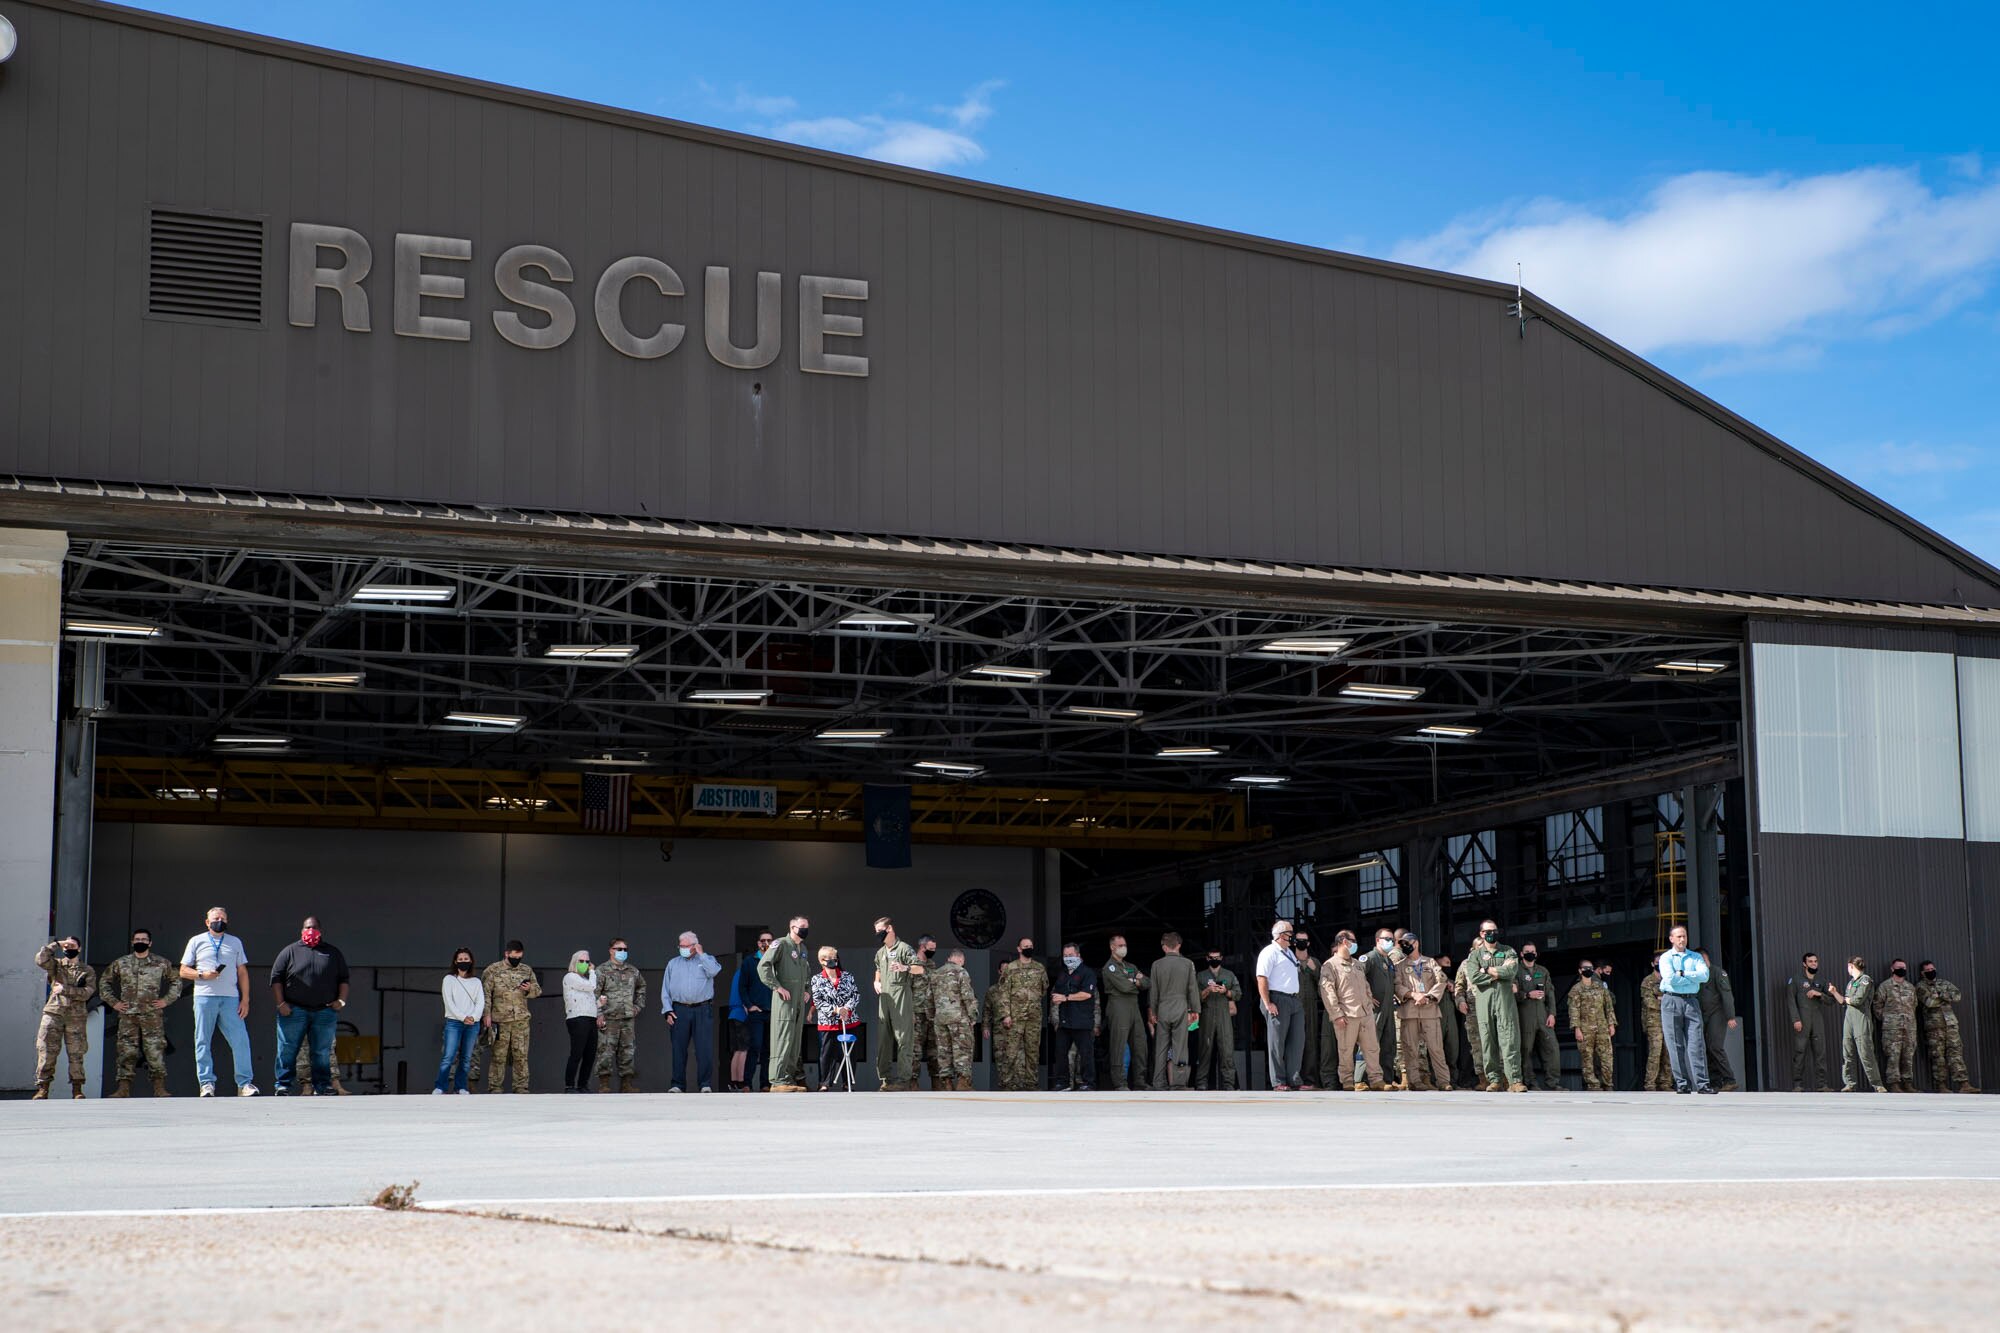 A photo of Airmen waiting for the arrival of a helicopter